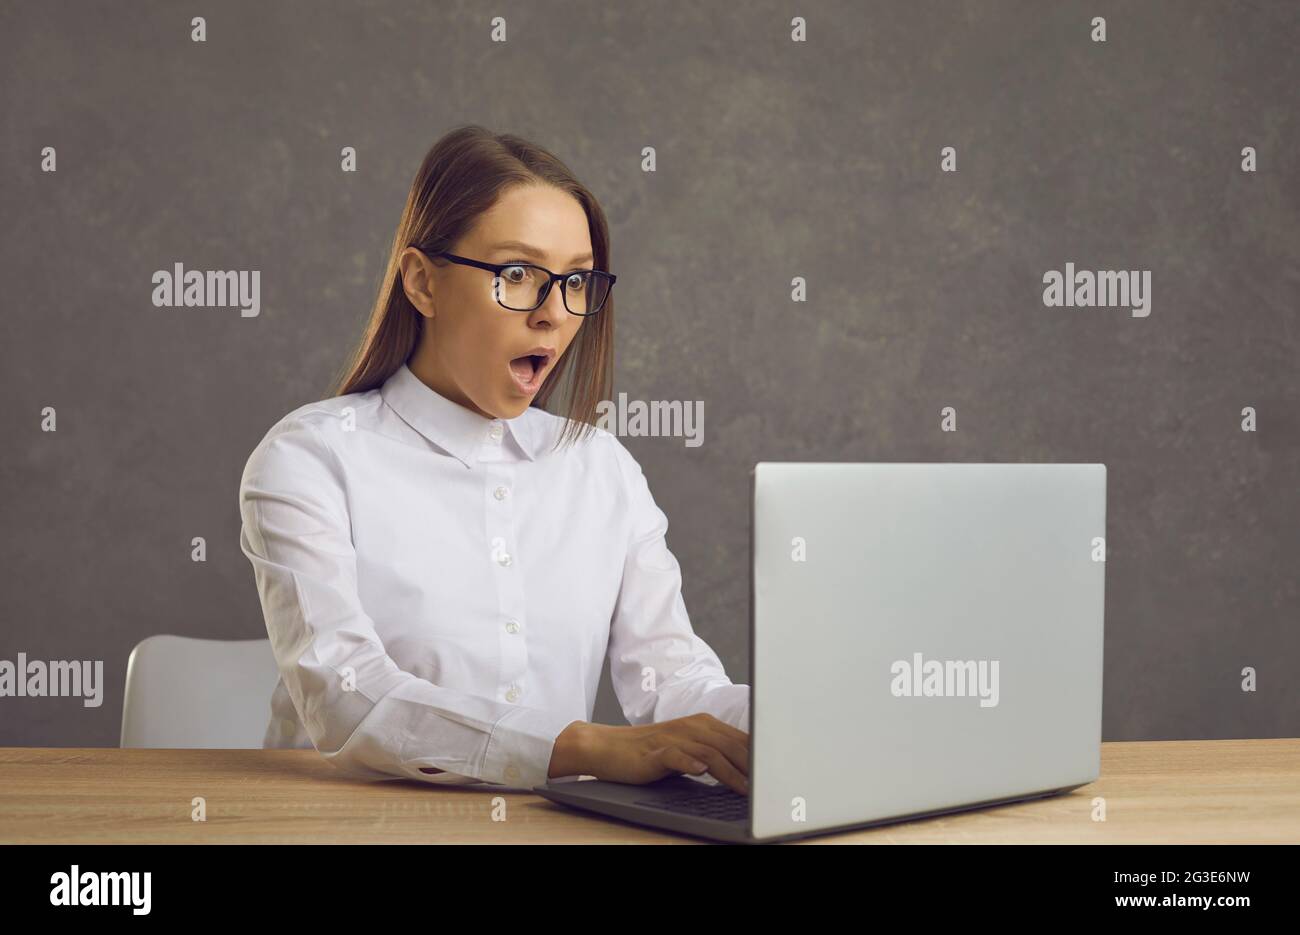 Portrait of young shocked astonished businesswoman woman working on laptop Stock Photo